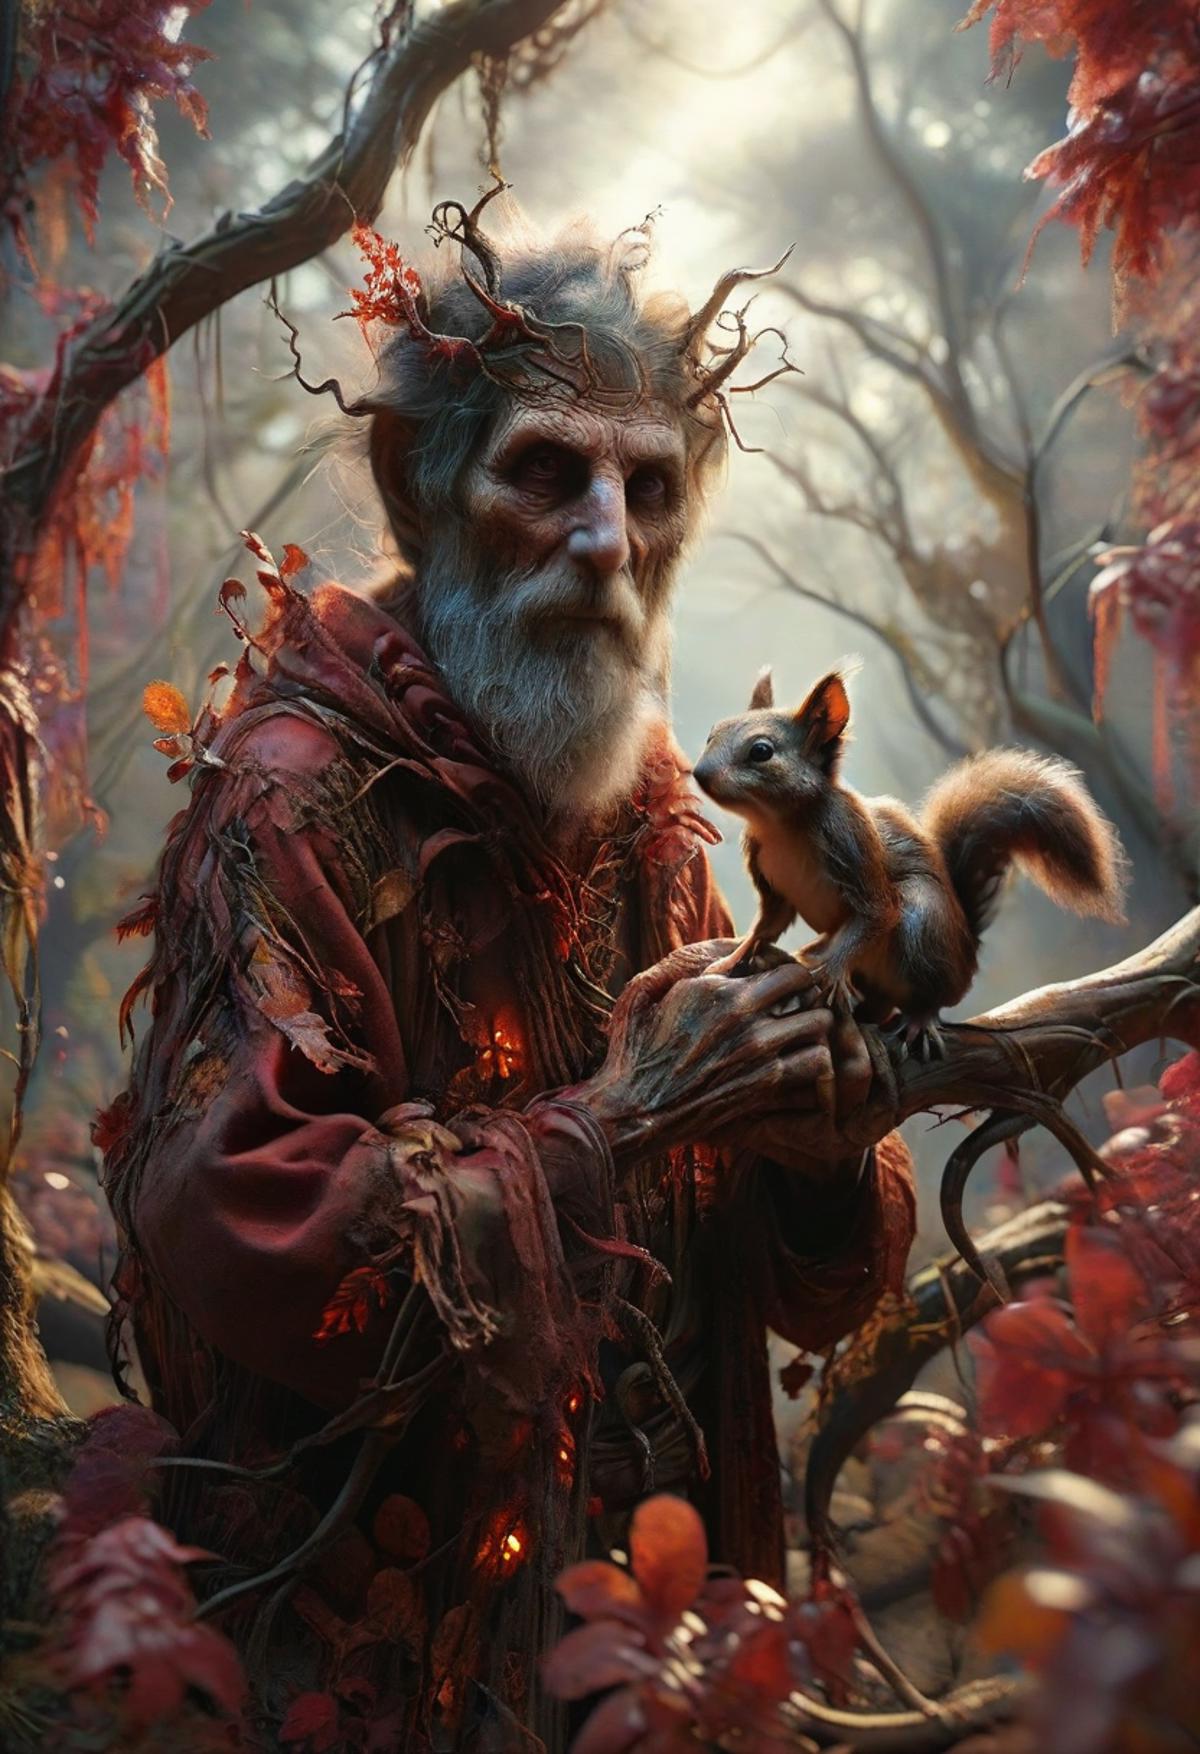 A wizard holding a squirrel in a forest setting.